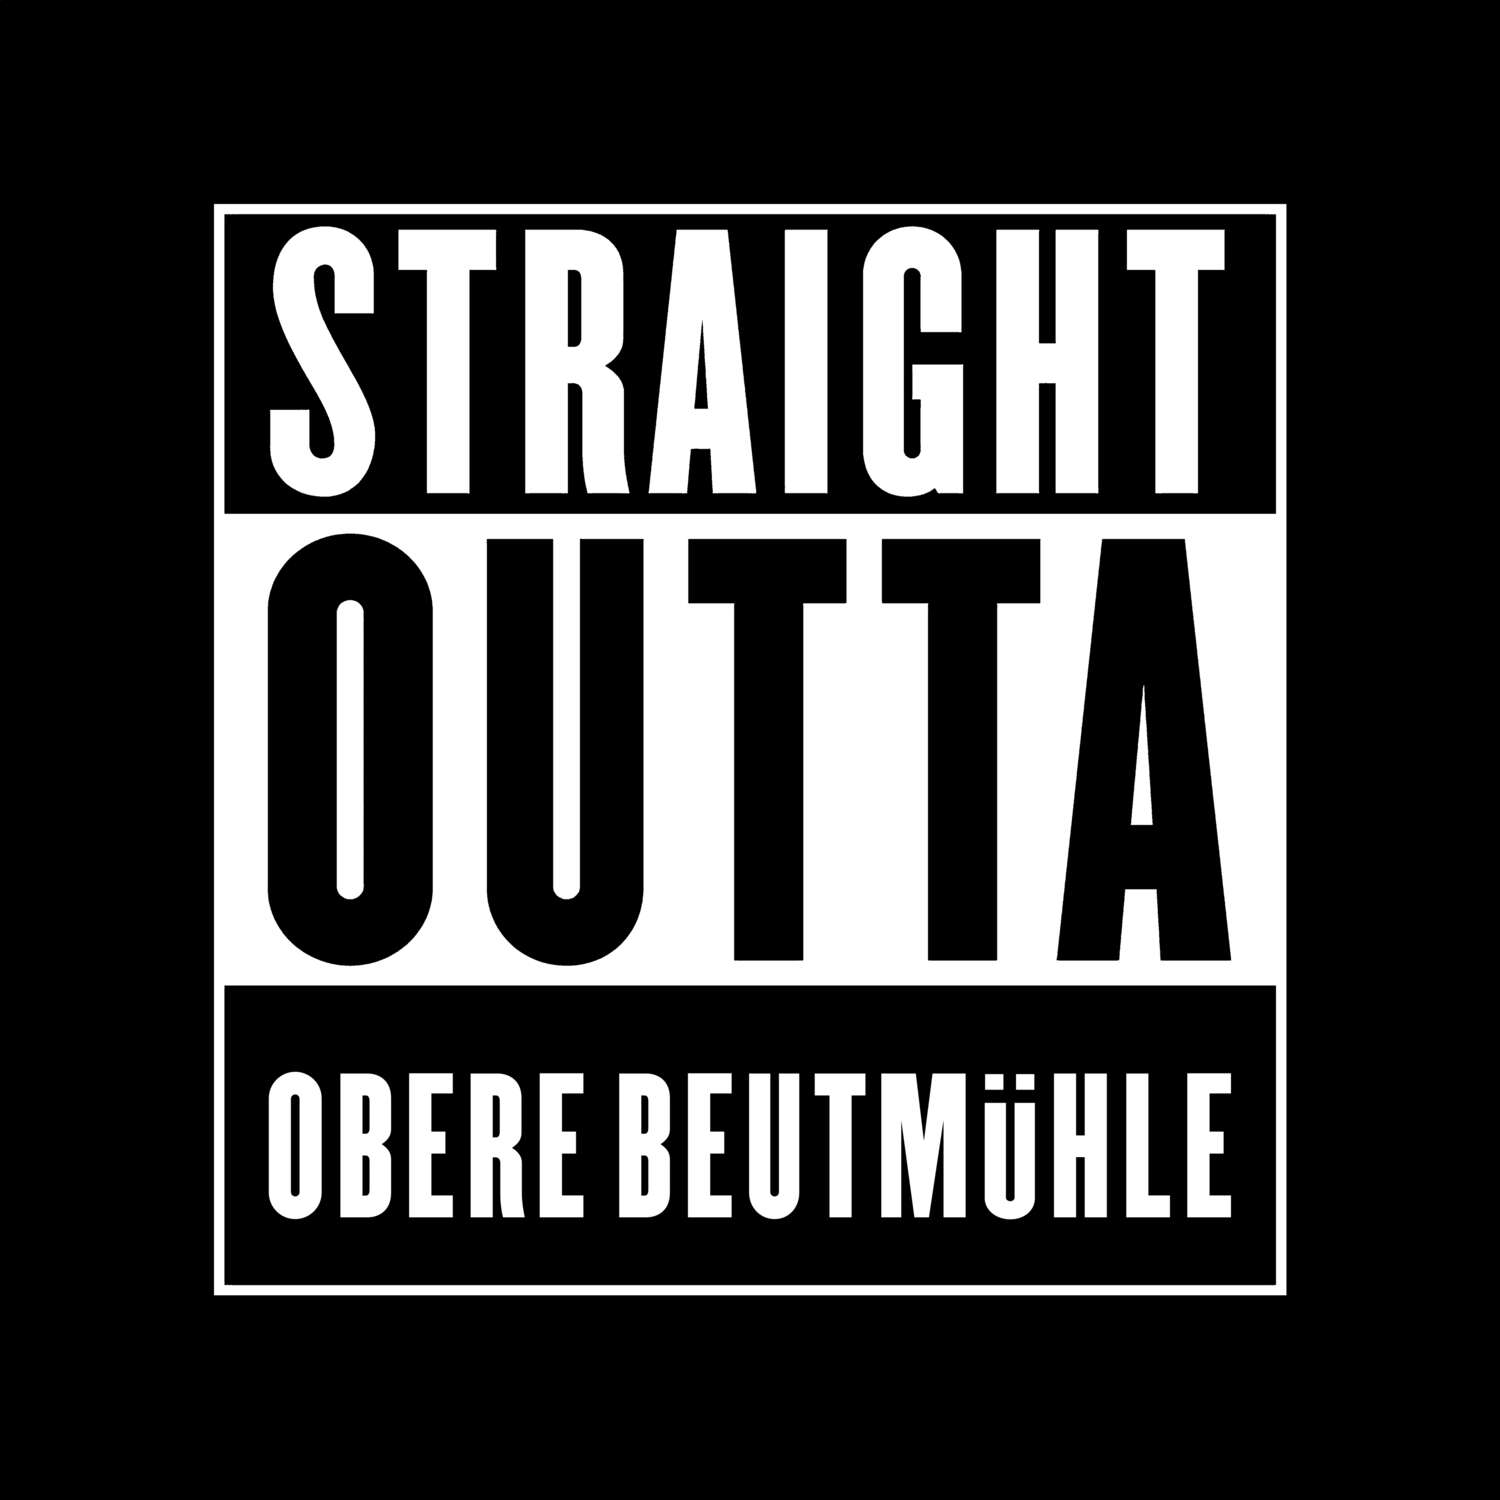 Obere Beutmühle T-Shirt »Straight Outta«